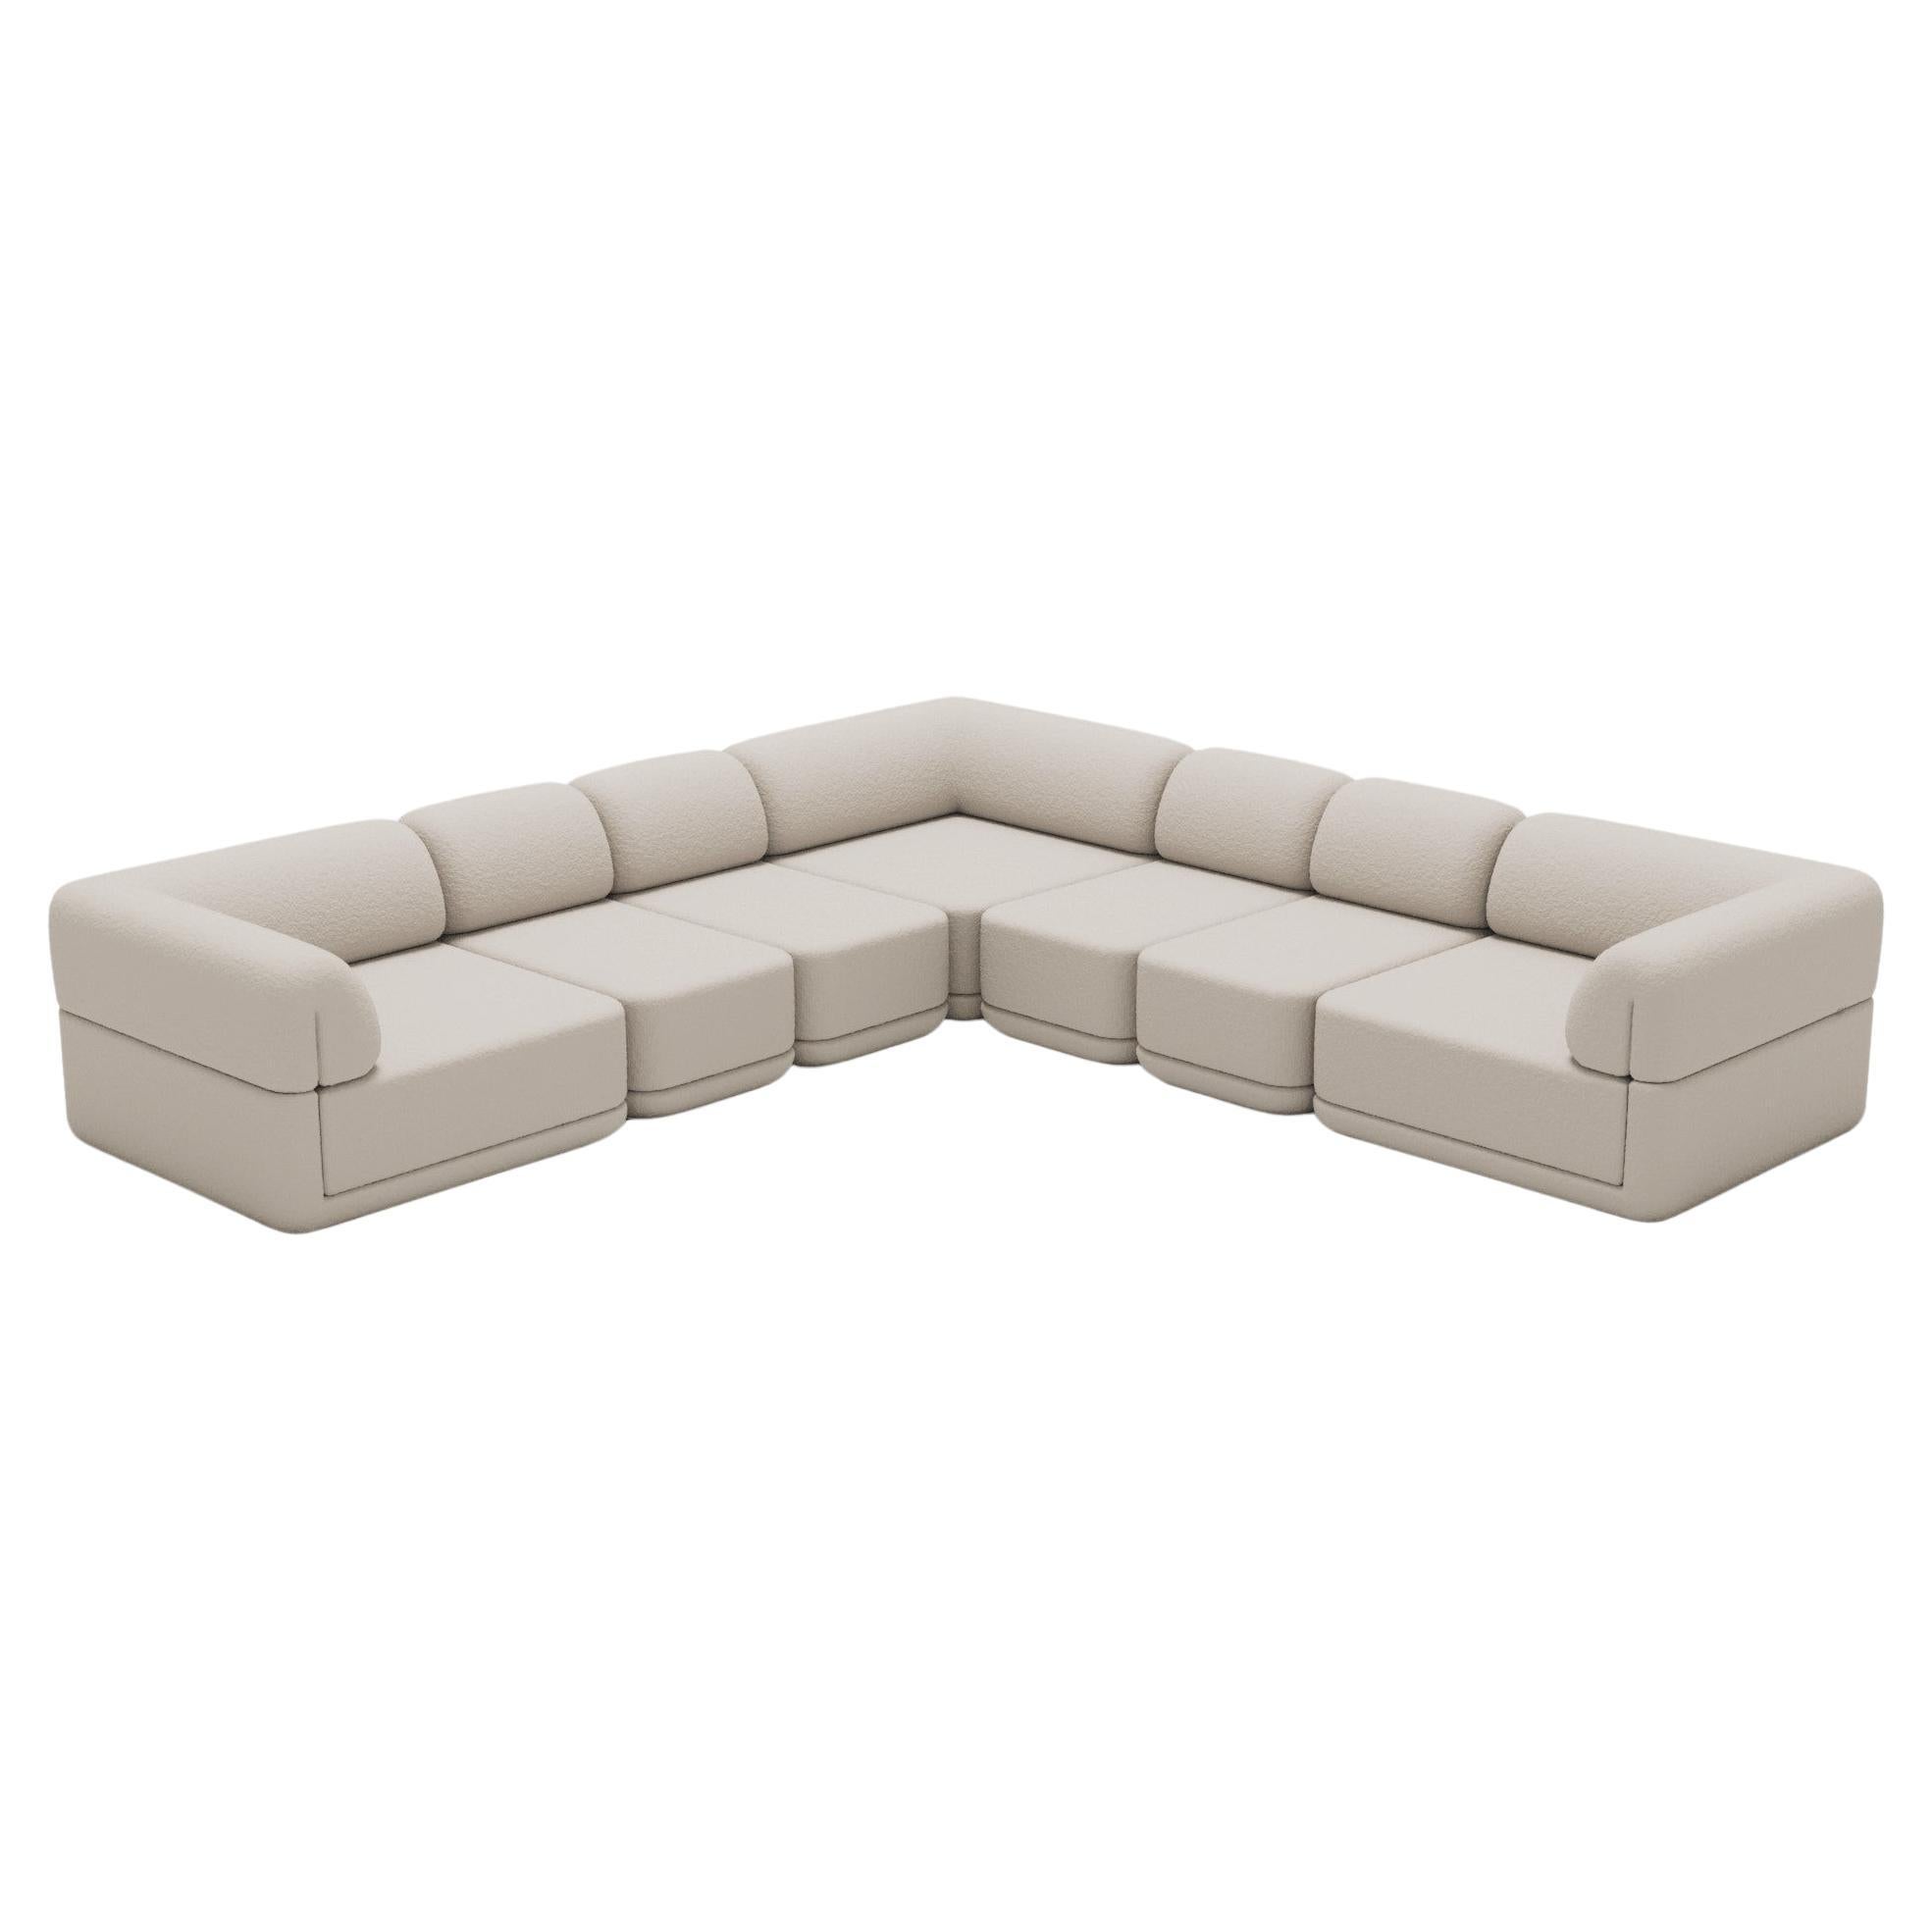 Corner Slim Sectional - Inspired by 70s Italian Luxury Furniture

Discover The Cube Sofa, where art meets adaptability. Its sculptural design and customizable comfort create endless possibilities for your living space. Make a statement, elevate your